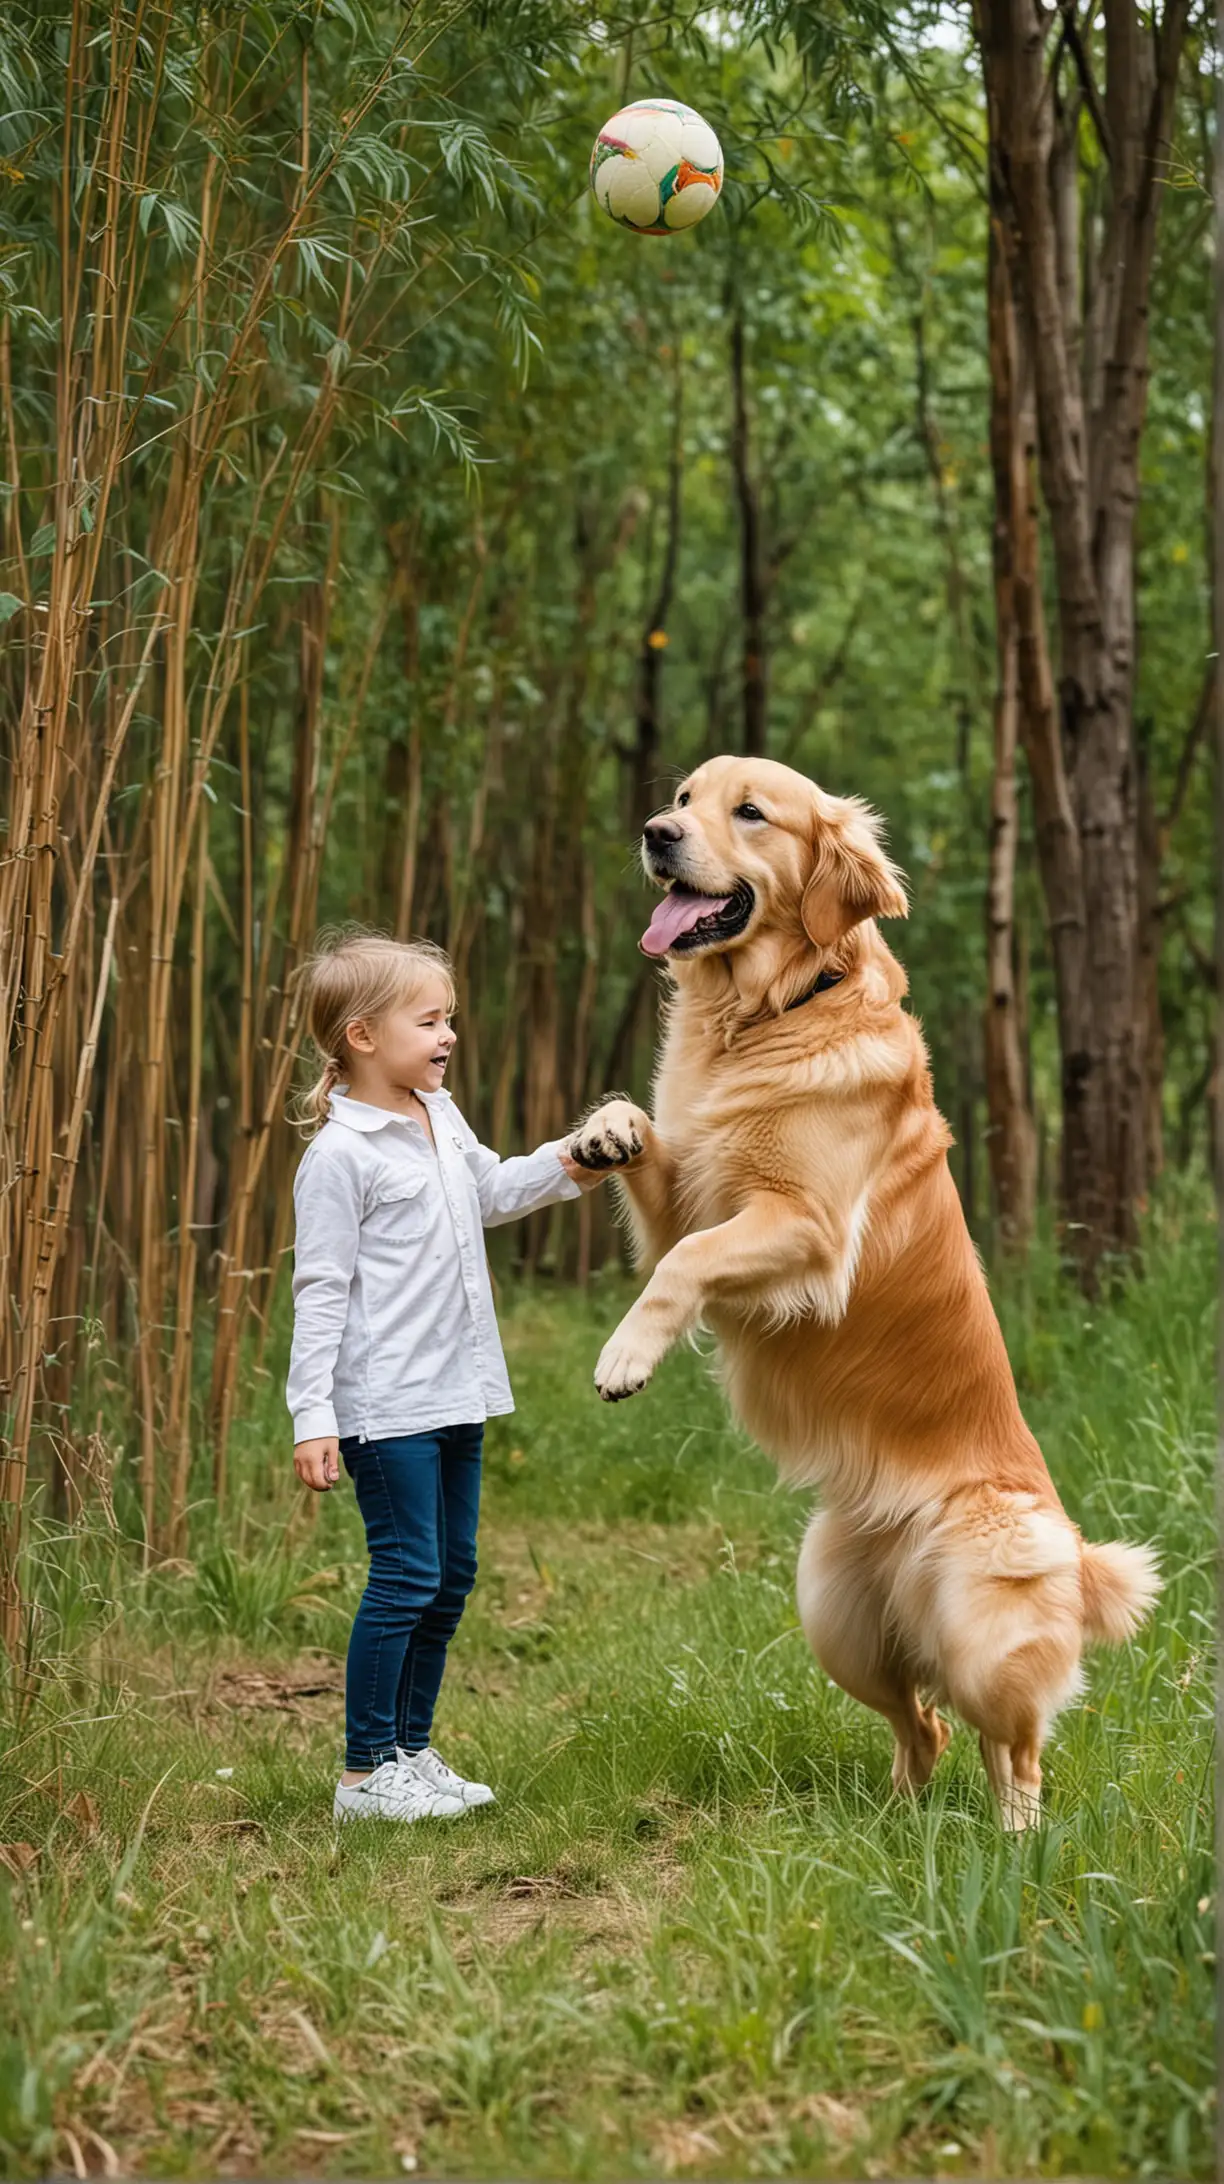 Golden Retriever Playing Ball with Kids Near Forest